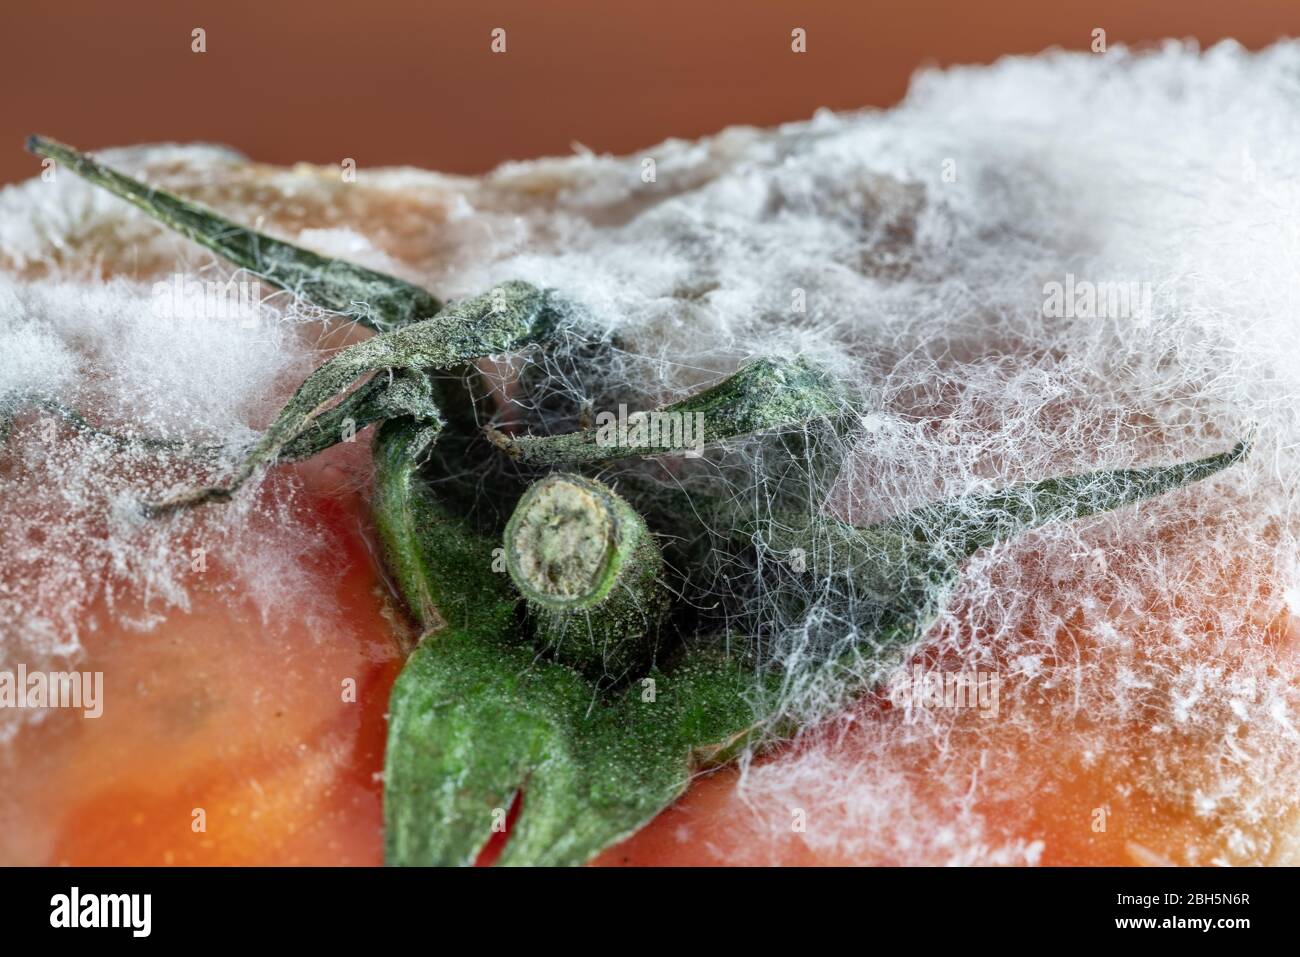 Rotten tomato with mold and fungi and moss closeup on a dark background. Stock Photo